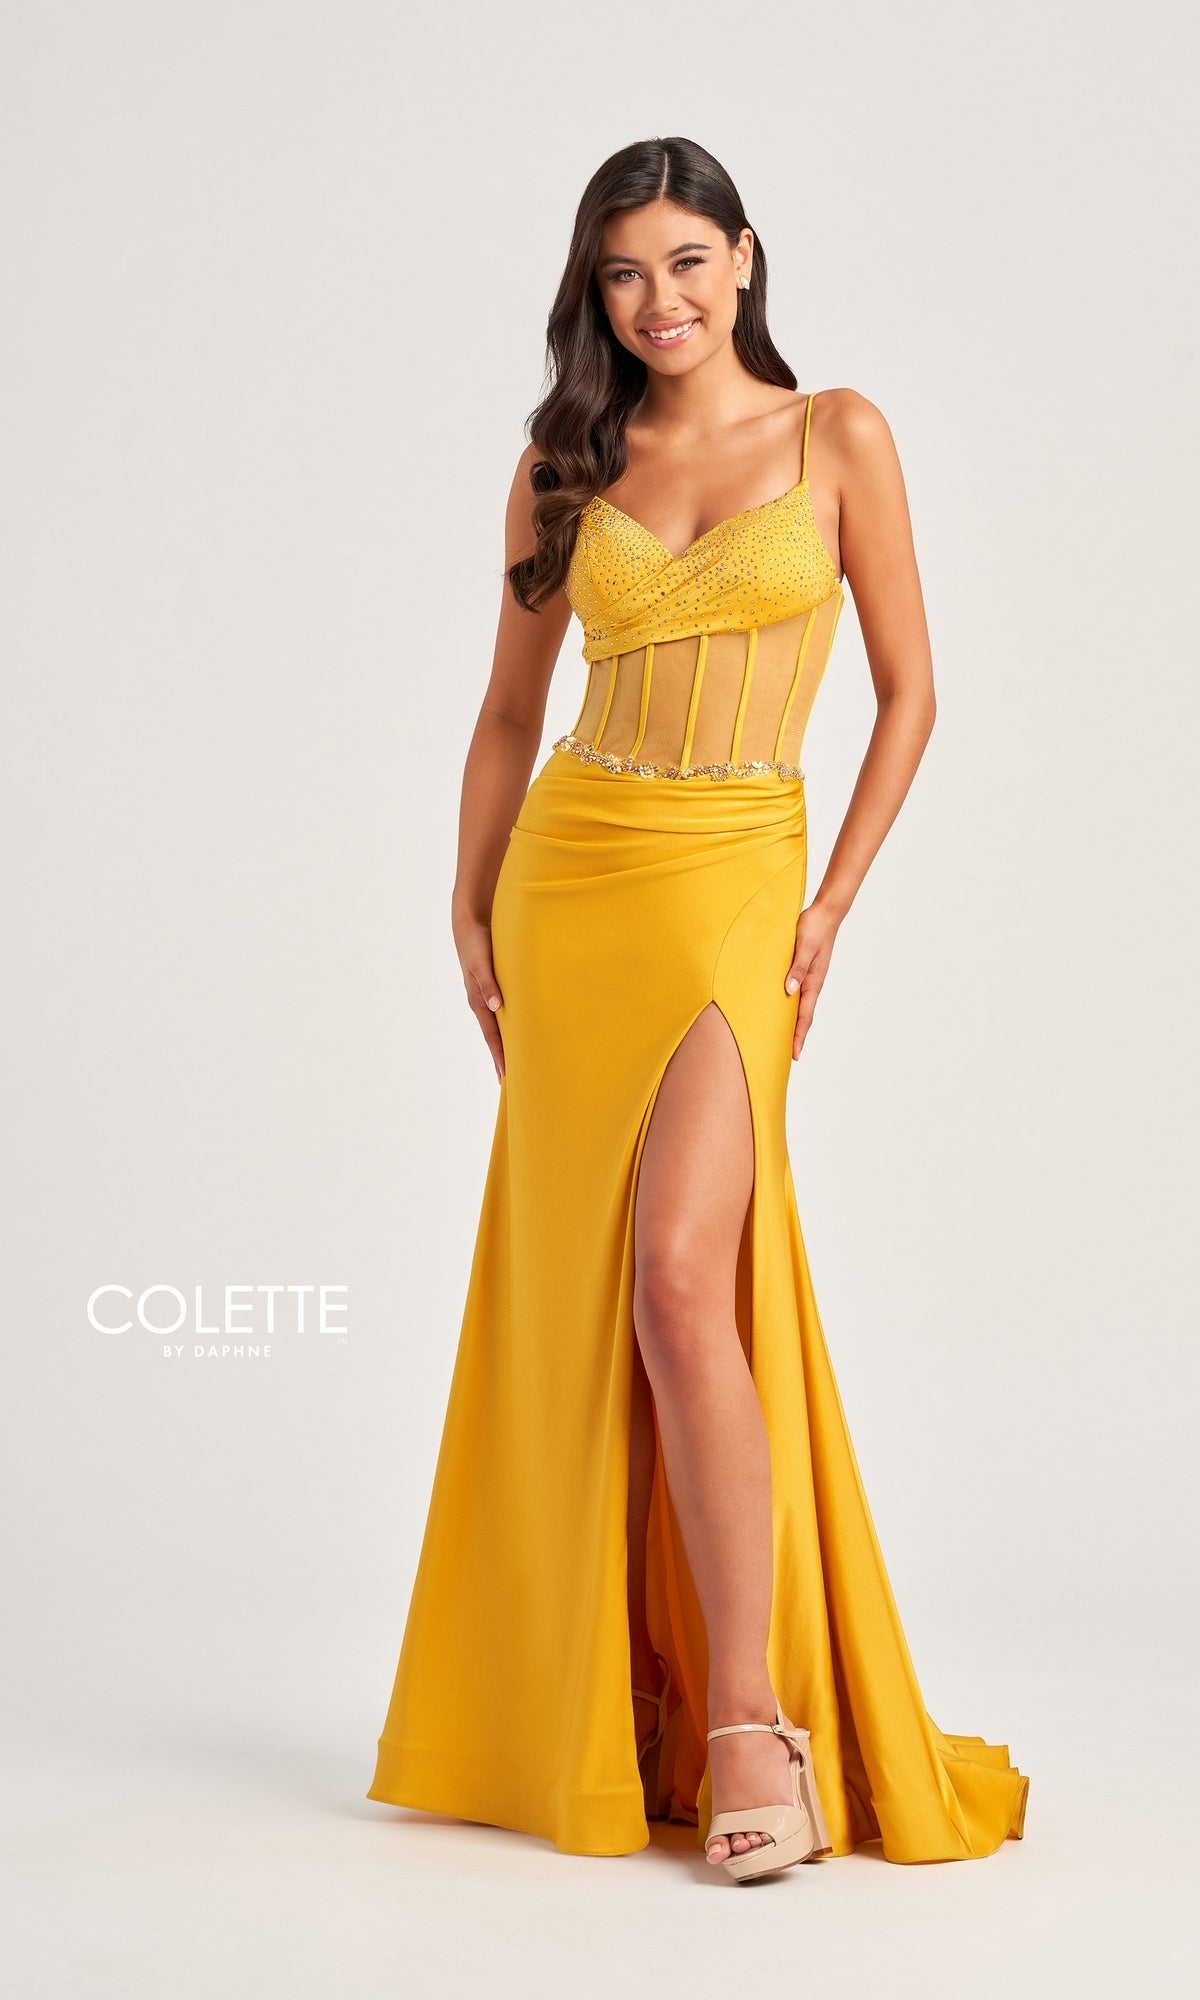 Sheer-Bodice Long Collette Prom Dress CL5104